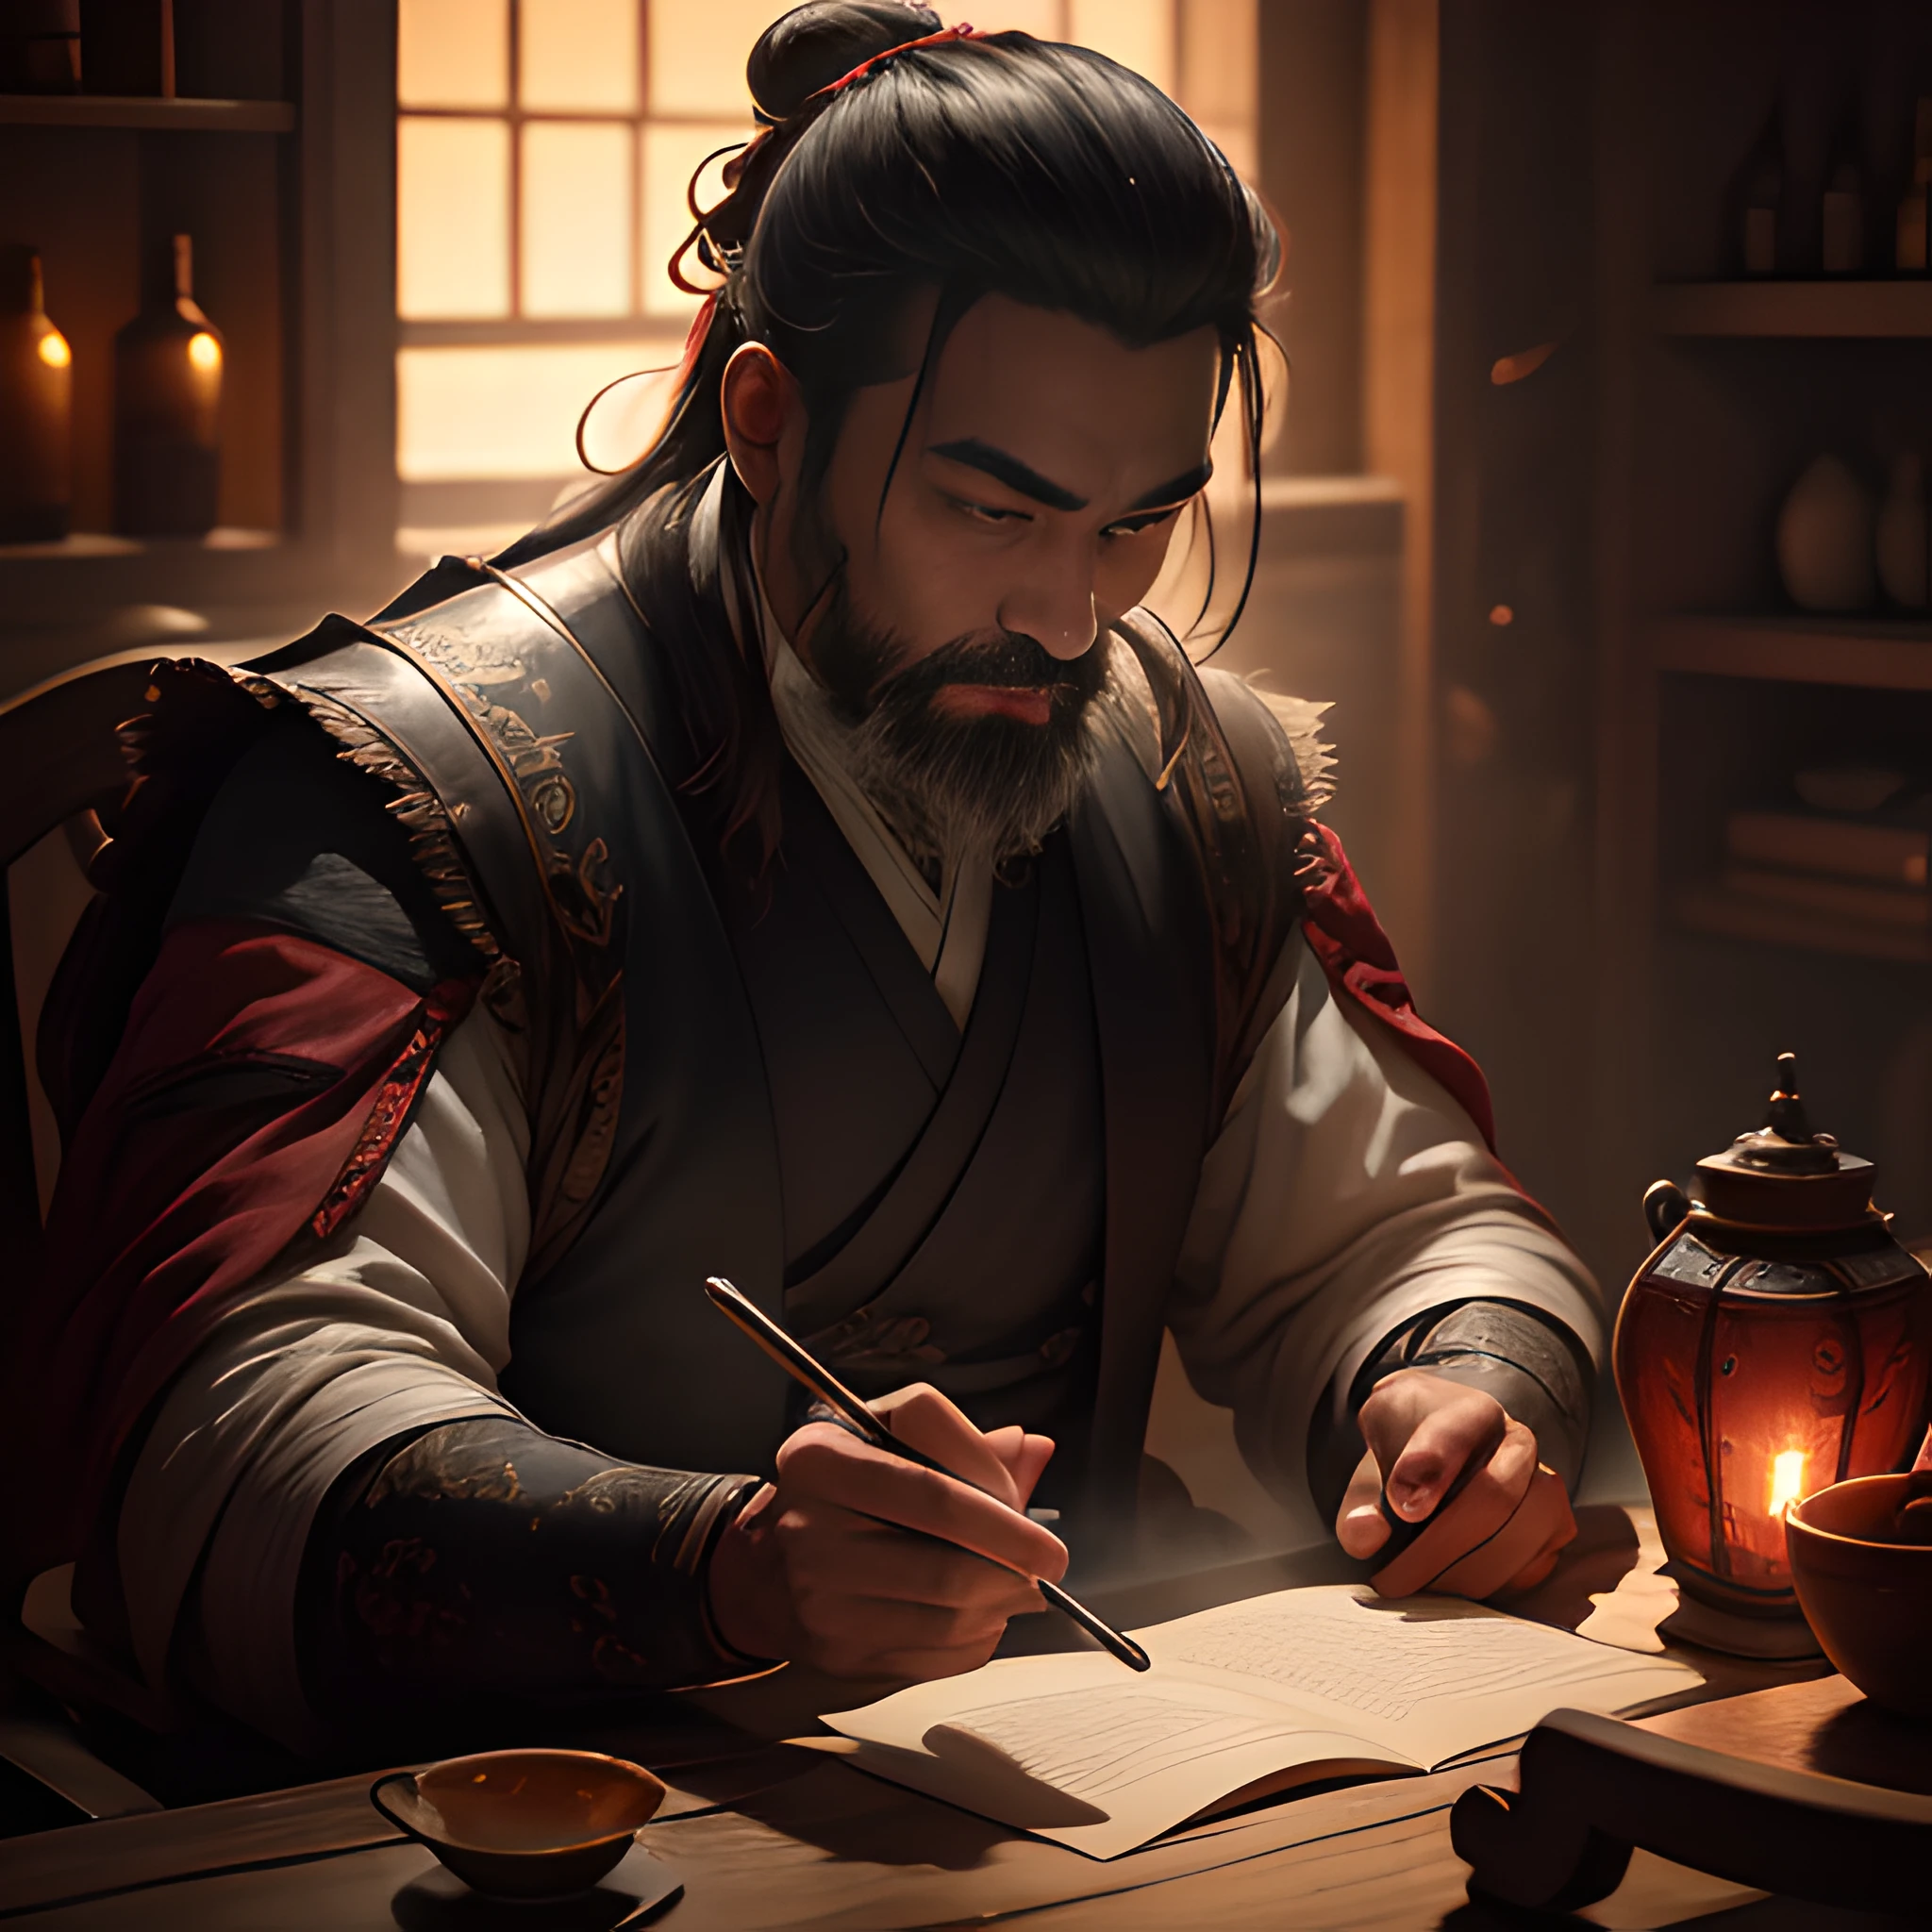 His name is Li Xunhuan, Dressed in white, cabelos preto e longos, Mature smile, Shot glass in hand, Literati dressed up, Sit at the table, There was a wine jug on the table, The background is inside the inn, without a beard, chiaroscuro, silhouette, film grain, Classicism, high detail, ray tracing, highres, best quality, retina, masterpiece, textured skin, anatomically correct